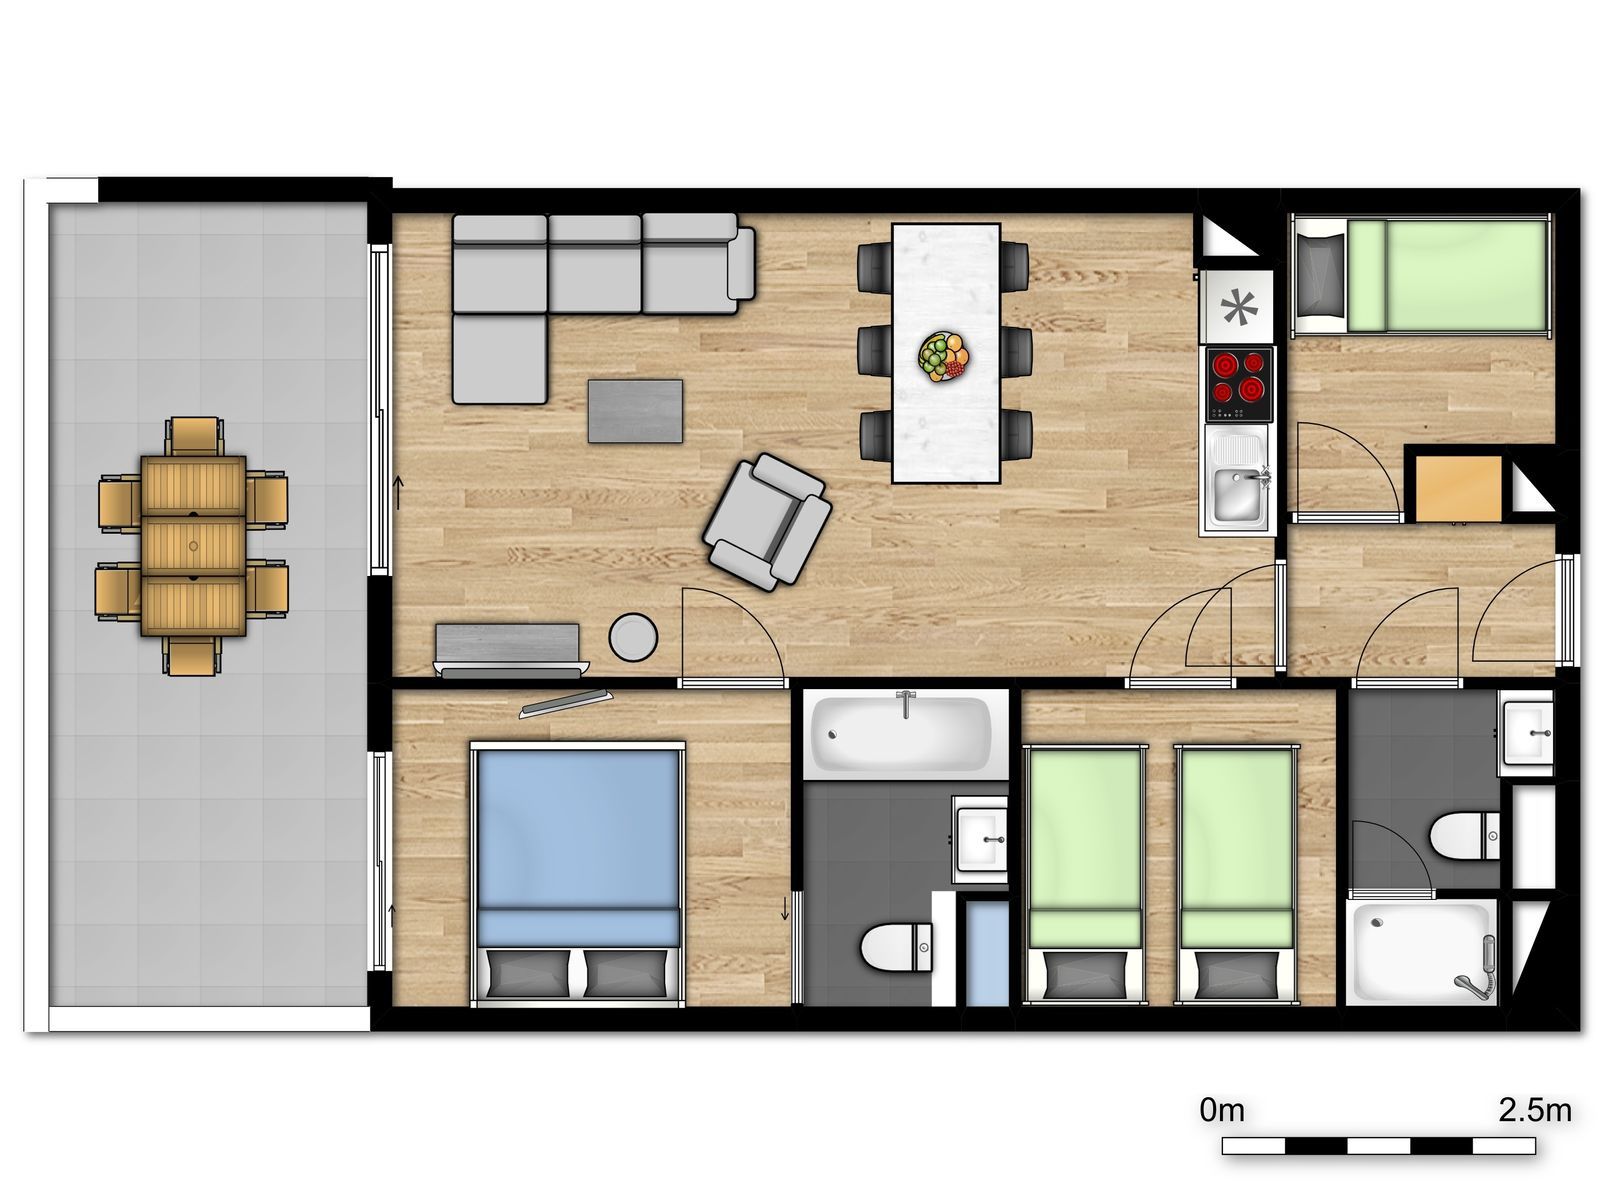 New family suite for 6 people